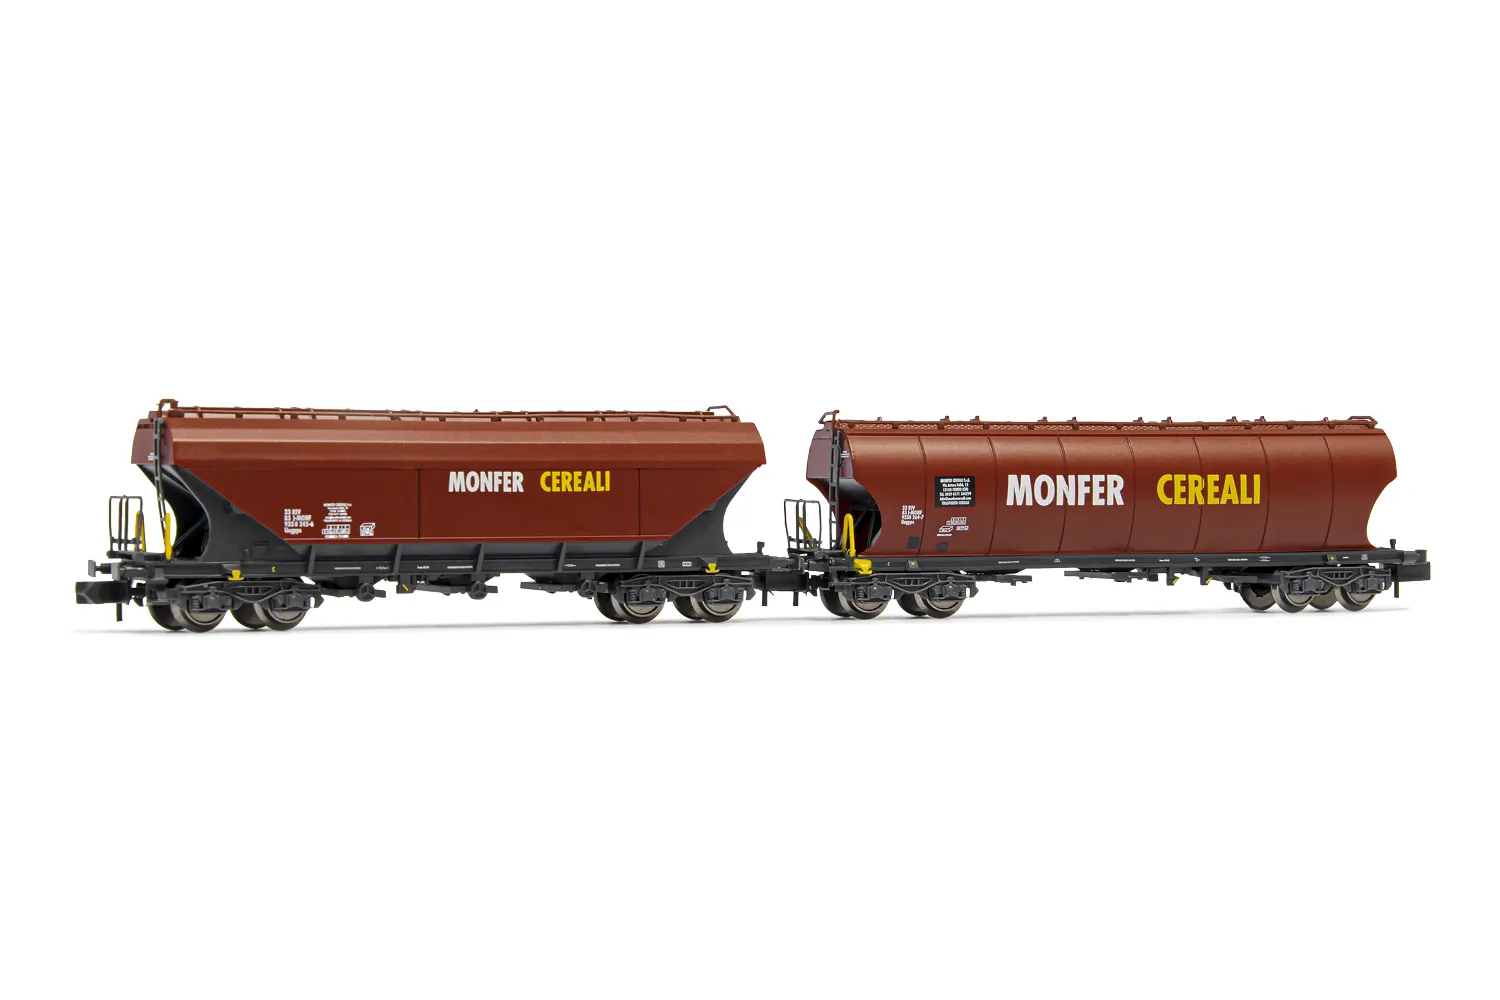 FS, 2-unit pack 4-axle silo wagons, one with flat- and one with rounded side walls, "MONFER CEREALI", dark red livery, period VI